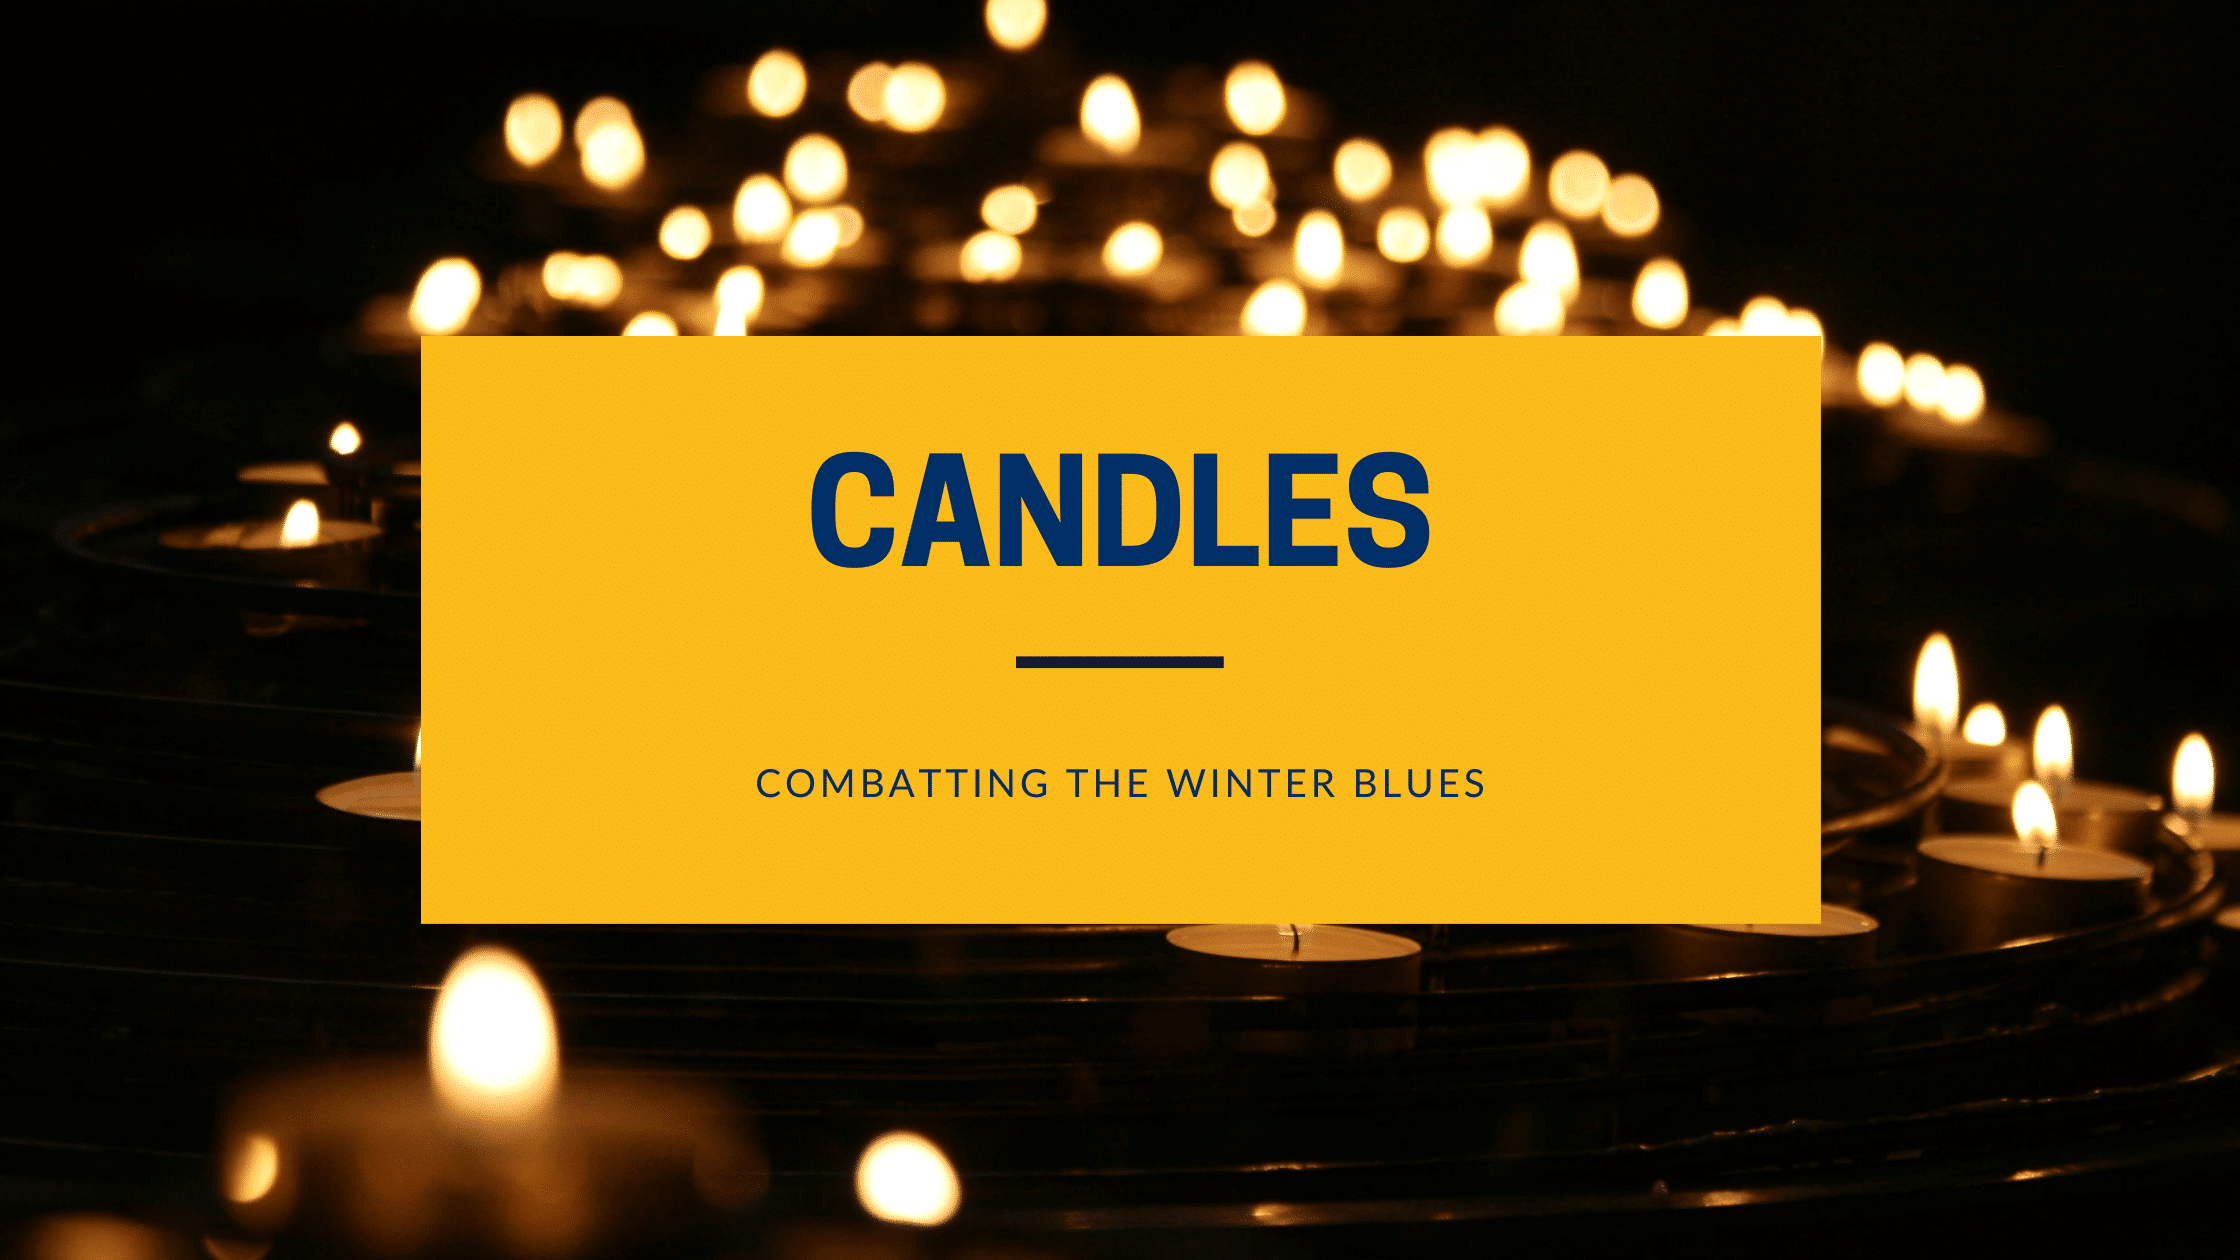 A group of 100 candles burn as a reminder to stave off the winter blues.